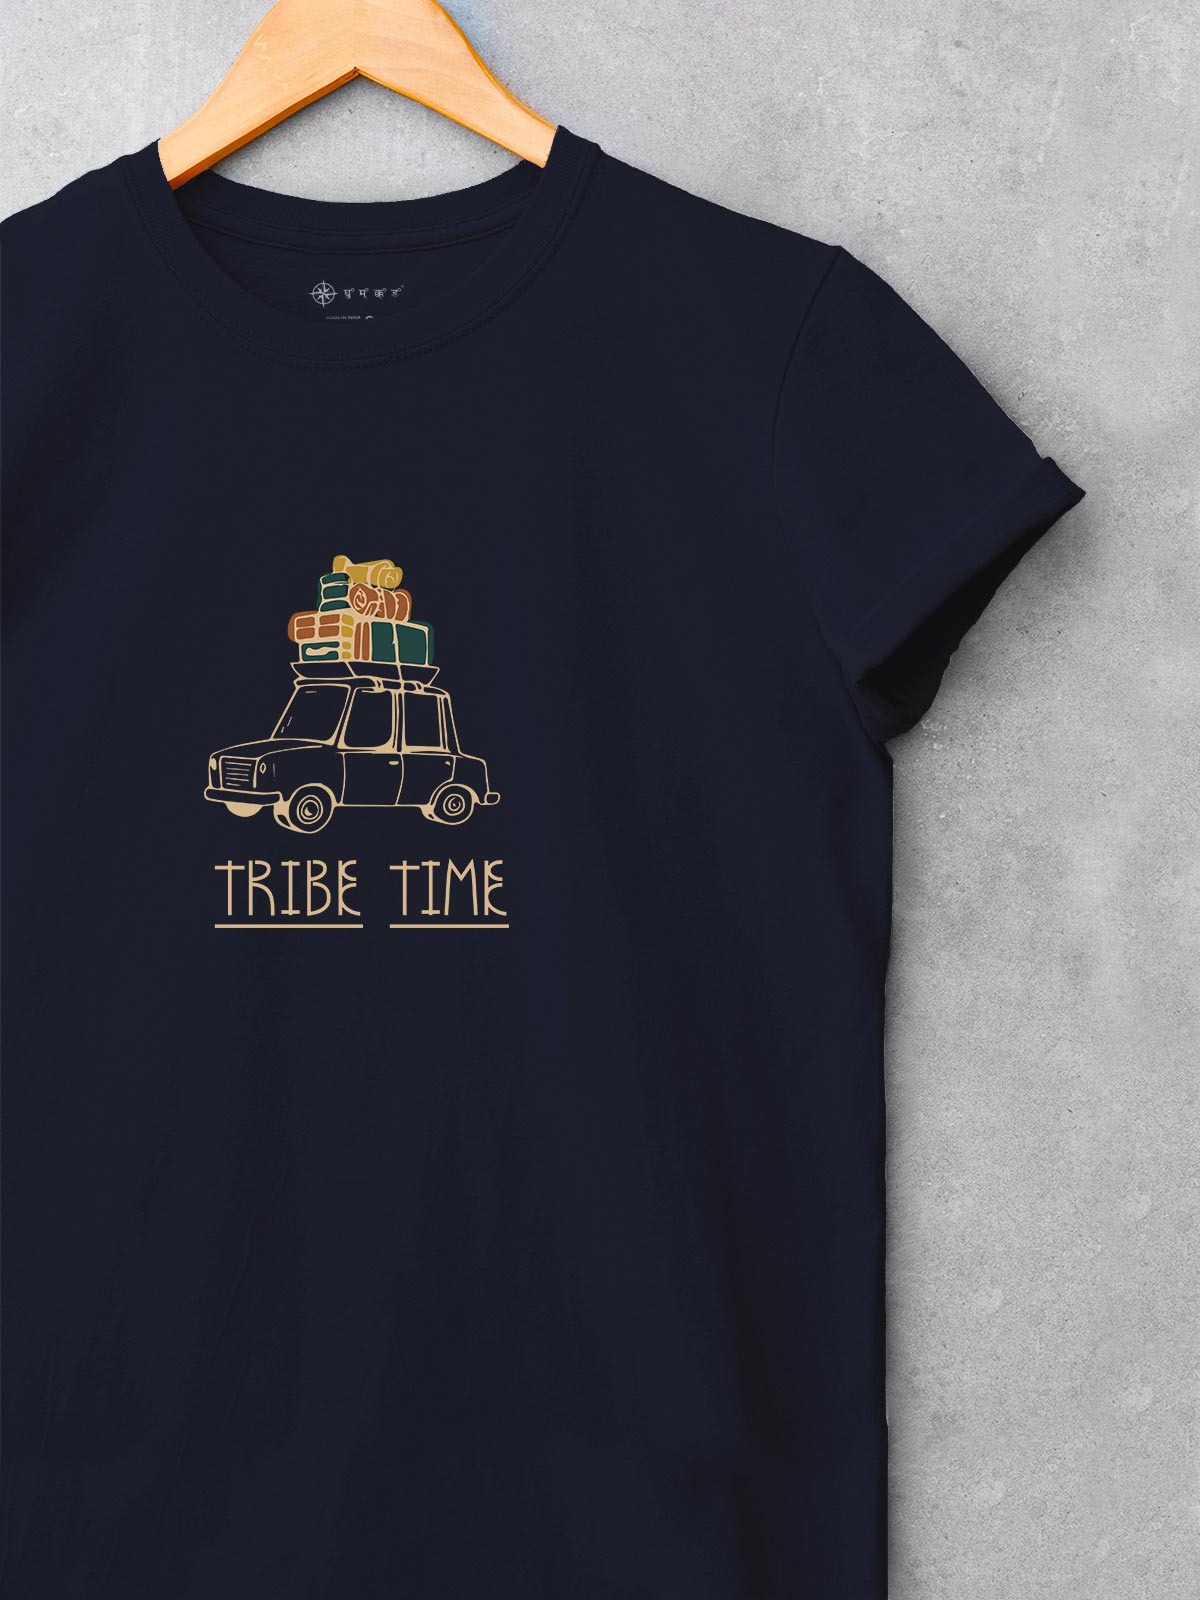 Tribe-time-printed-t-shirt-for-men by Ghumakkad